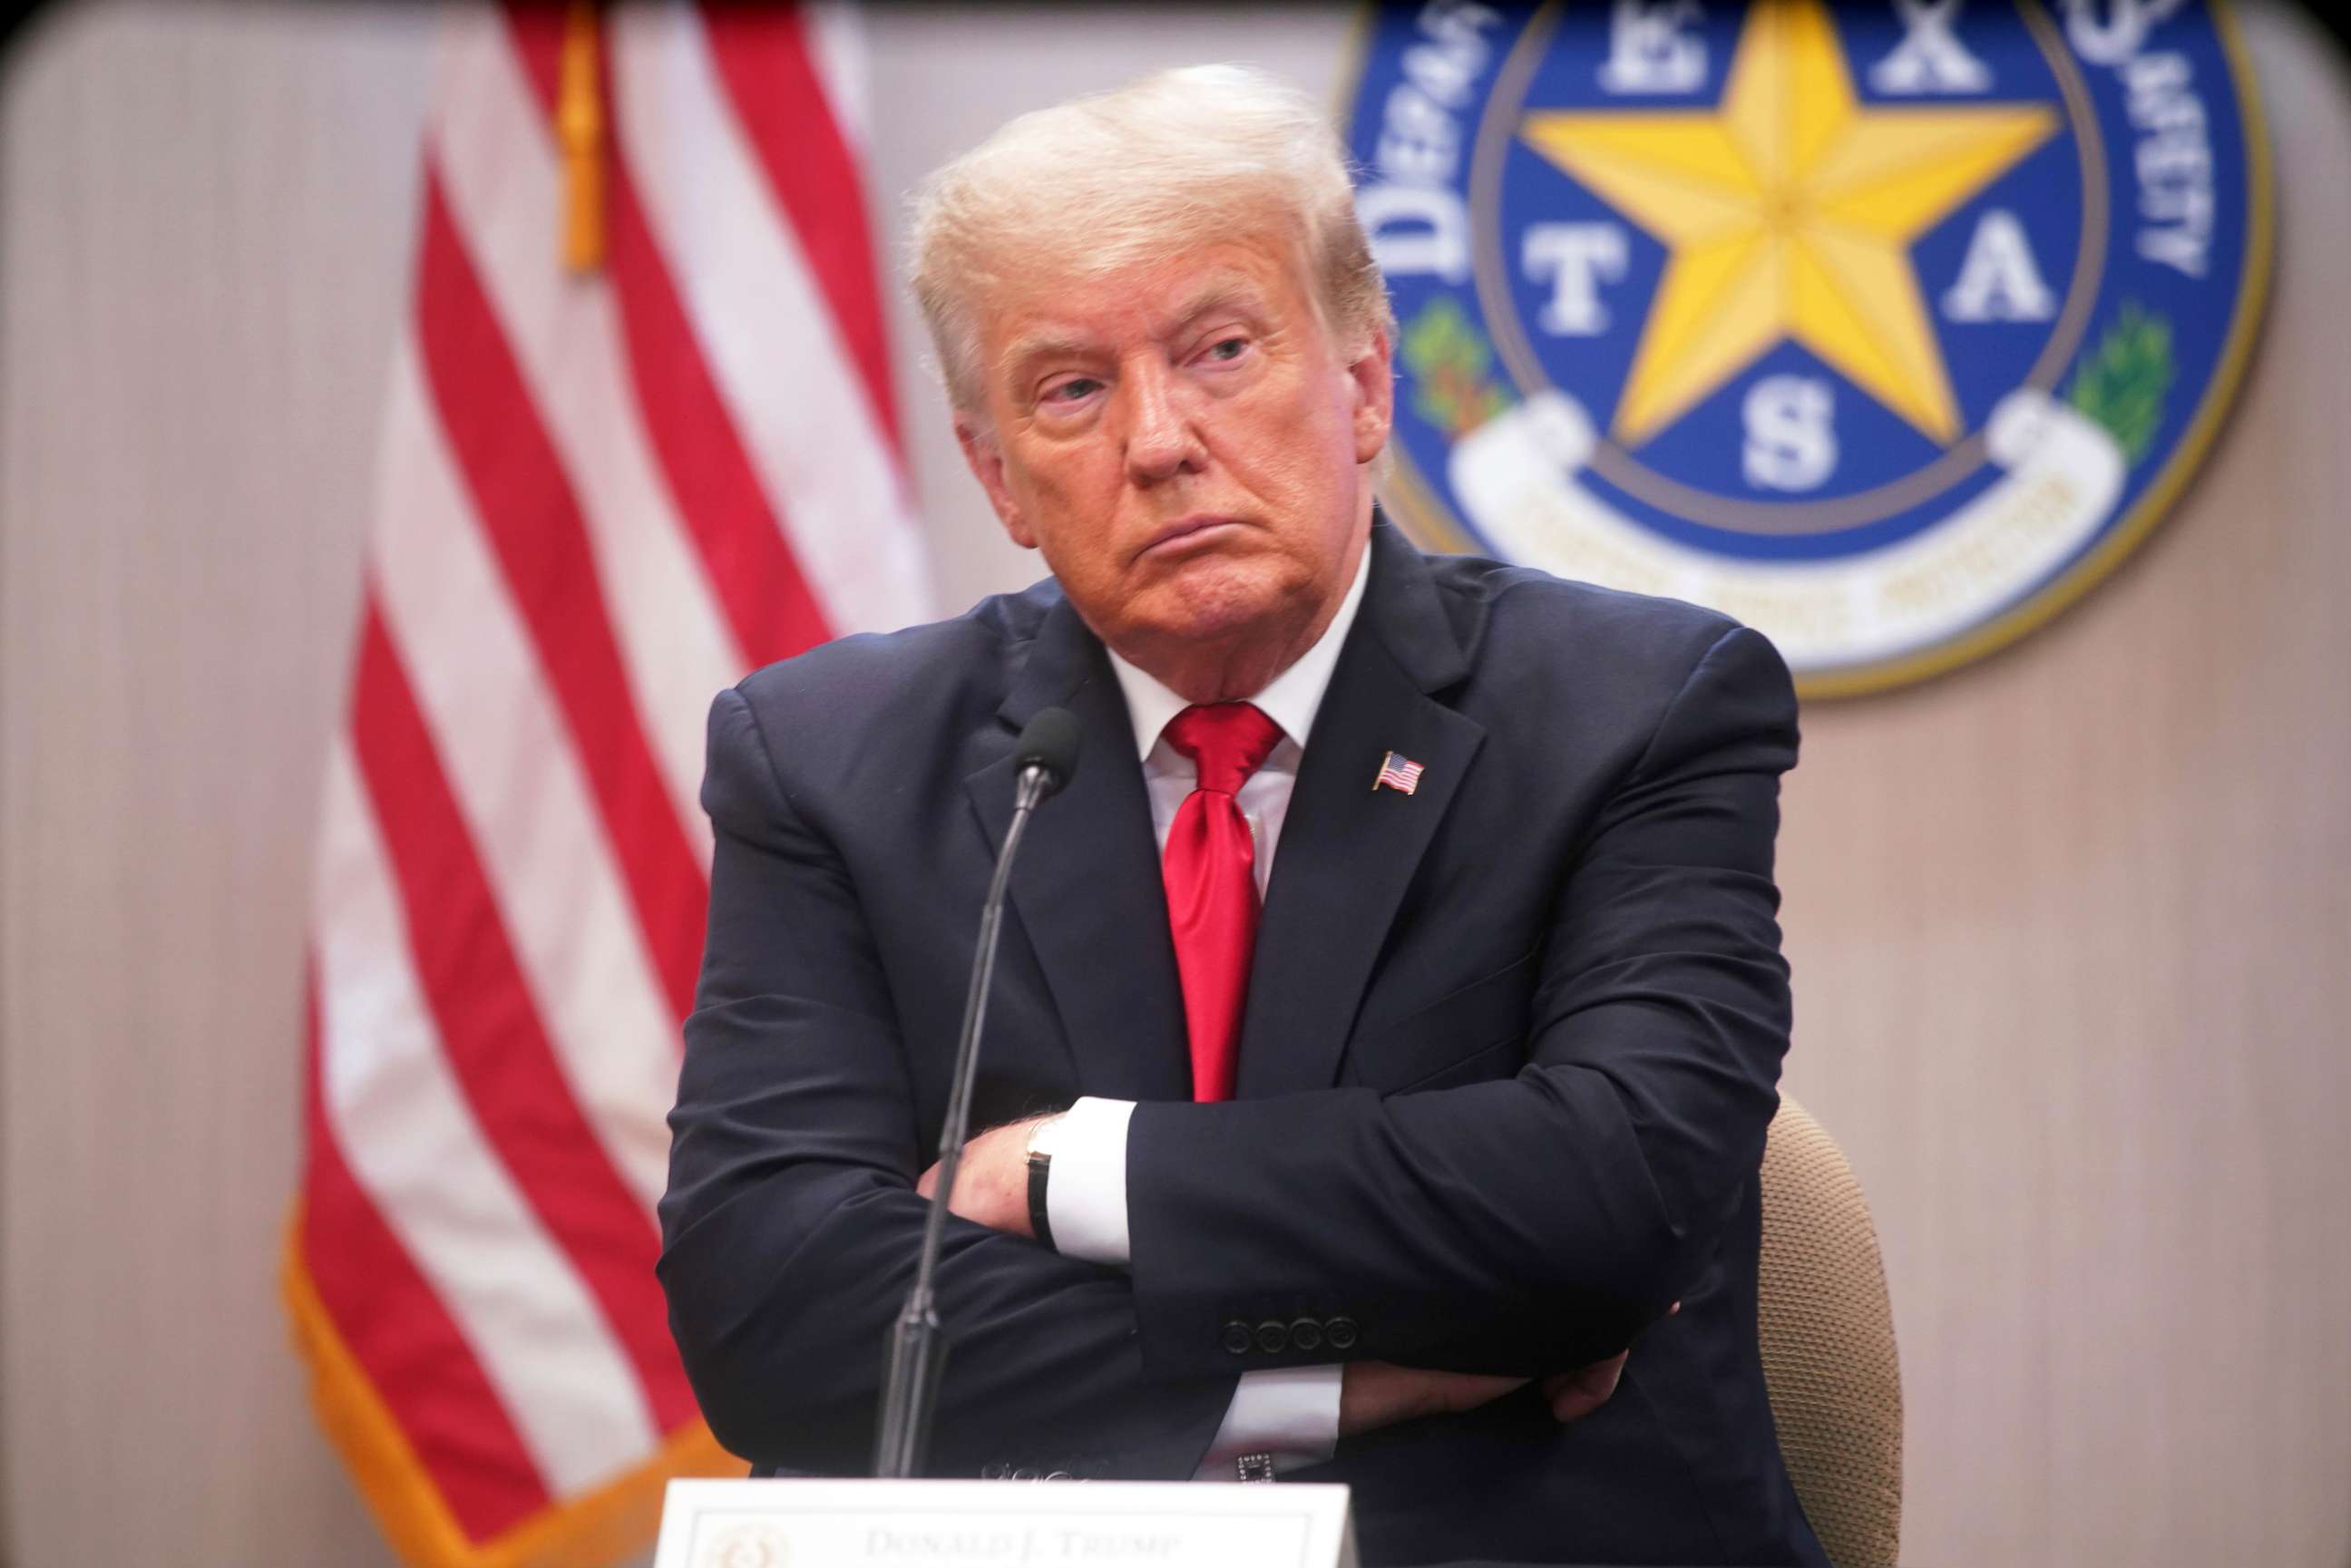 PHOTO: Former President Donald Trump listens to speakers at a border security briefing at the Texas DPS Weslaco Regional Office on Wednesday, June 30, 2021, in Weslaco, Texas.